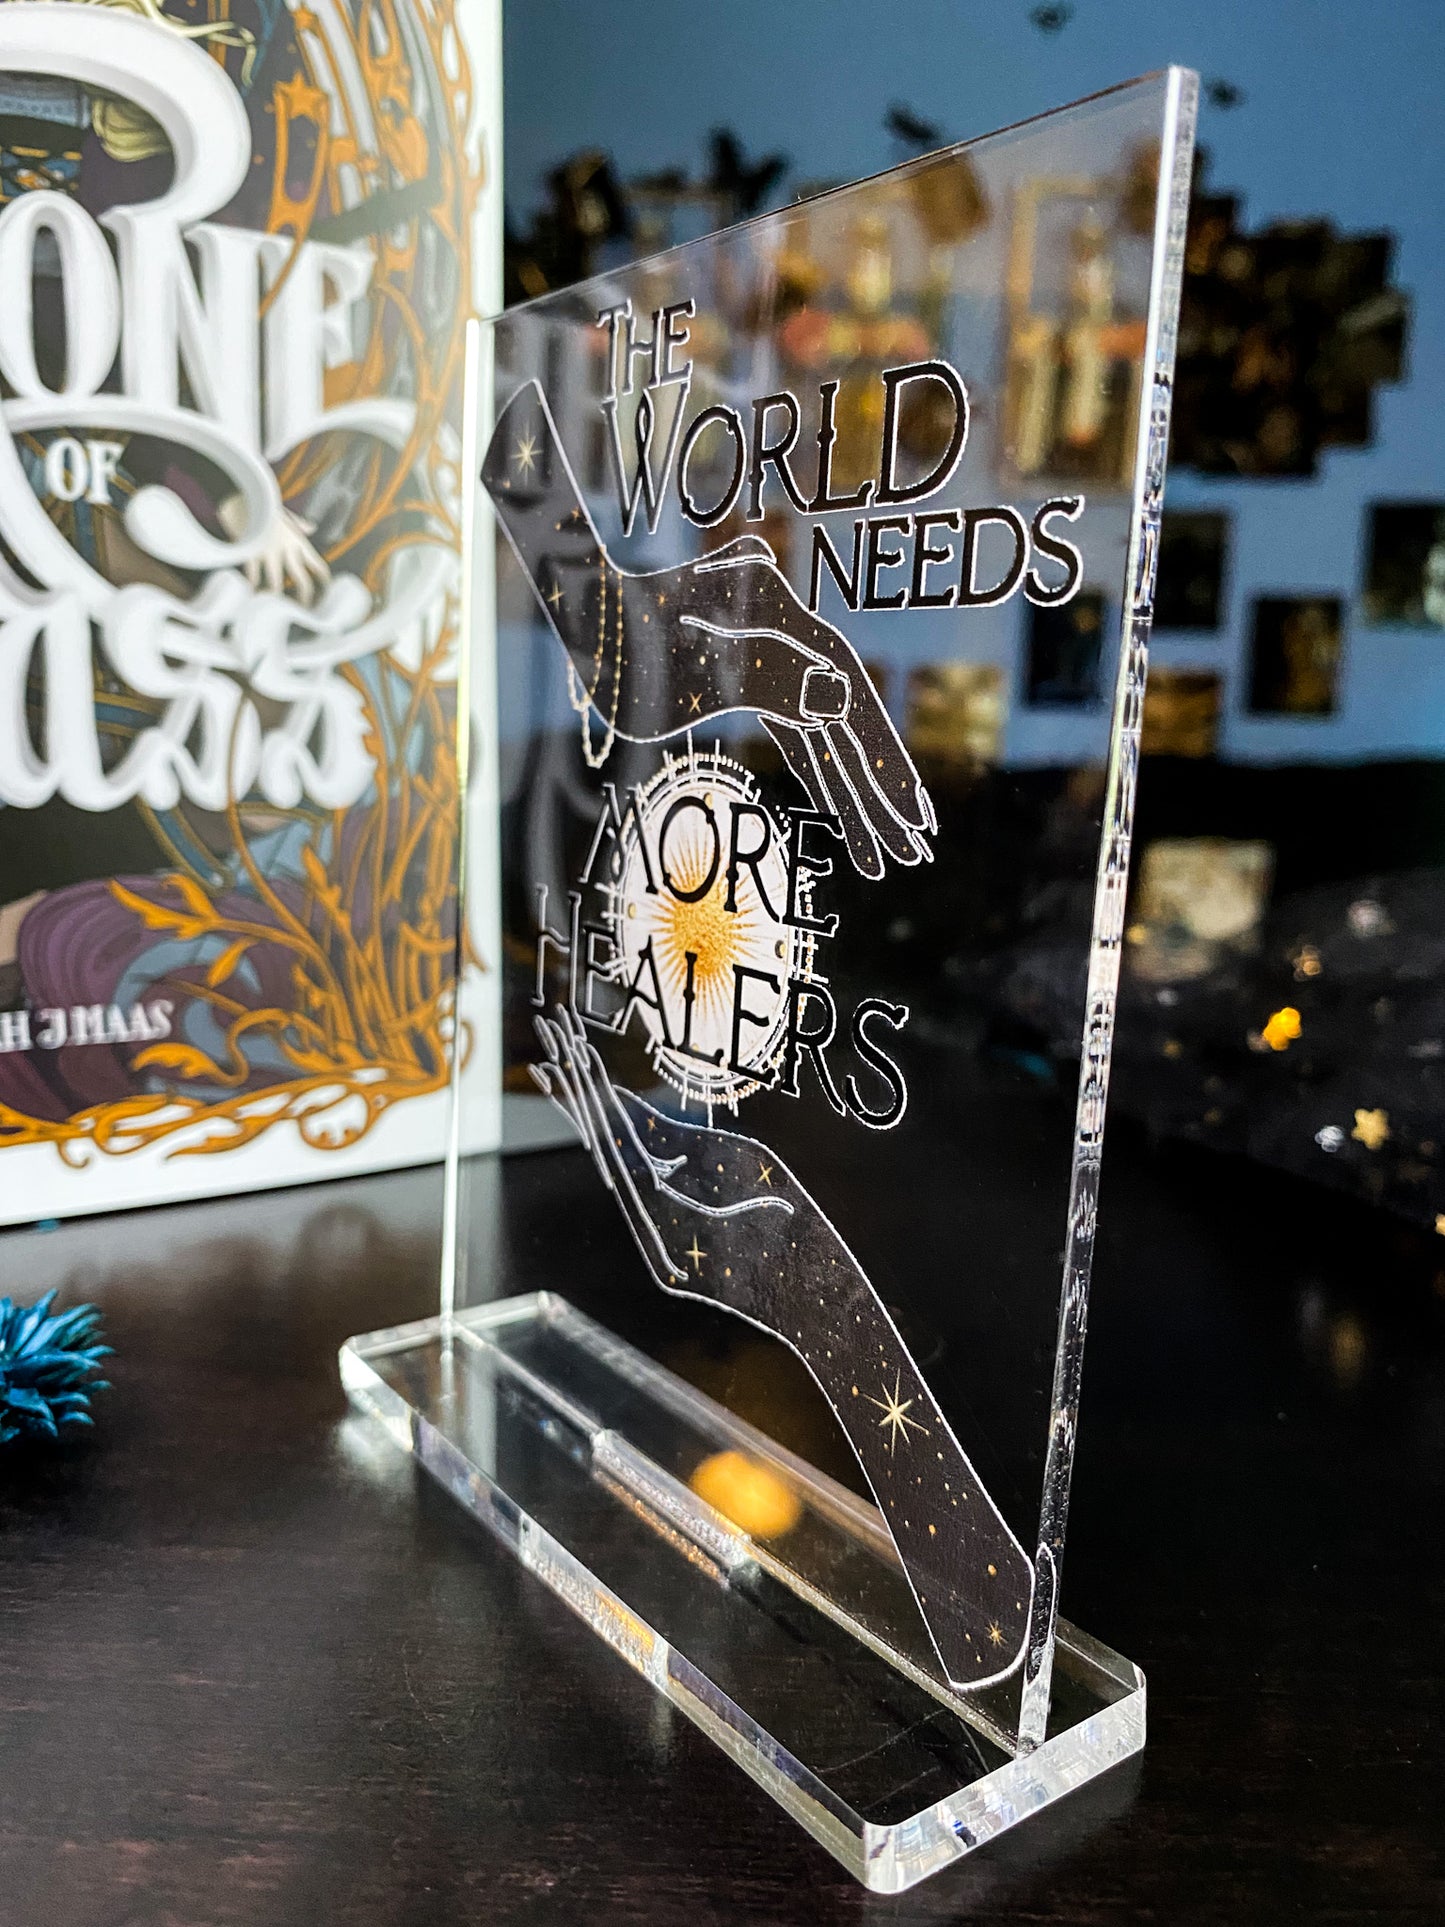 "The world needs more healers" - Throne of Glass Series - Freestanding Bookshelf / Desktop Acrylic Accessory - Officially licensed by Sarah J. Maas - D52